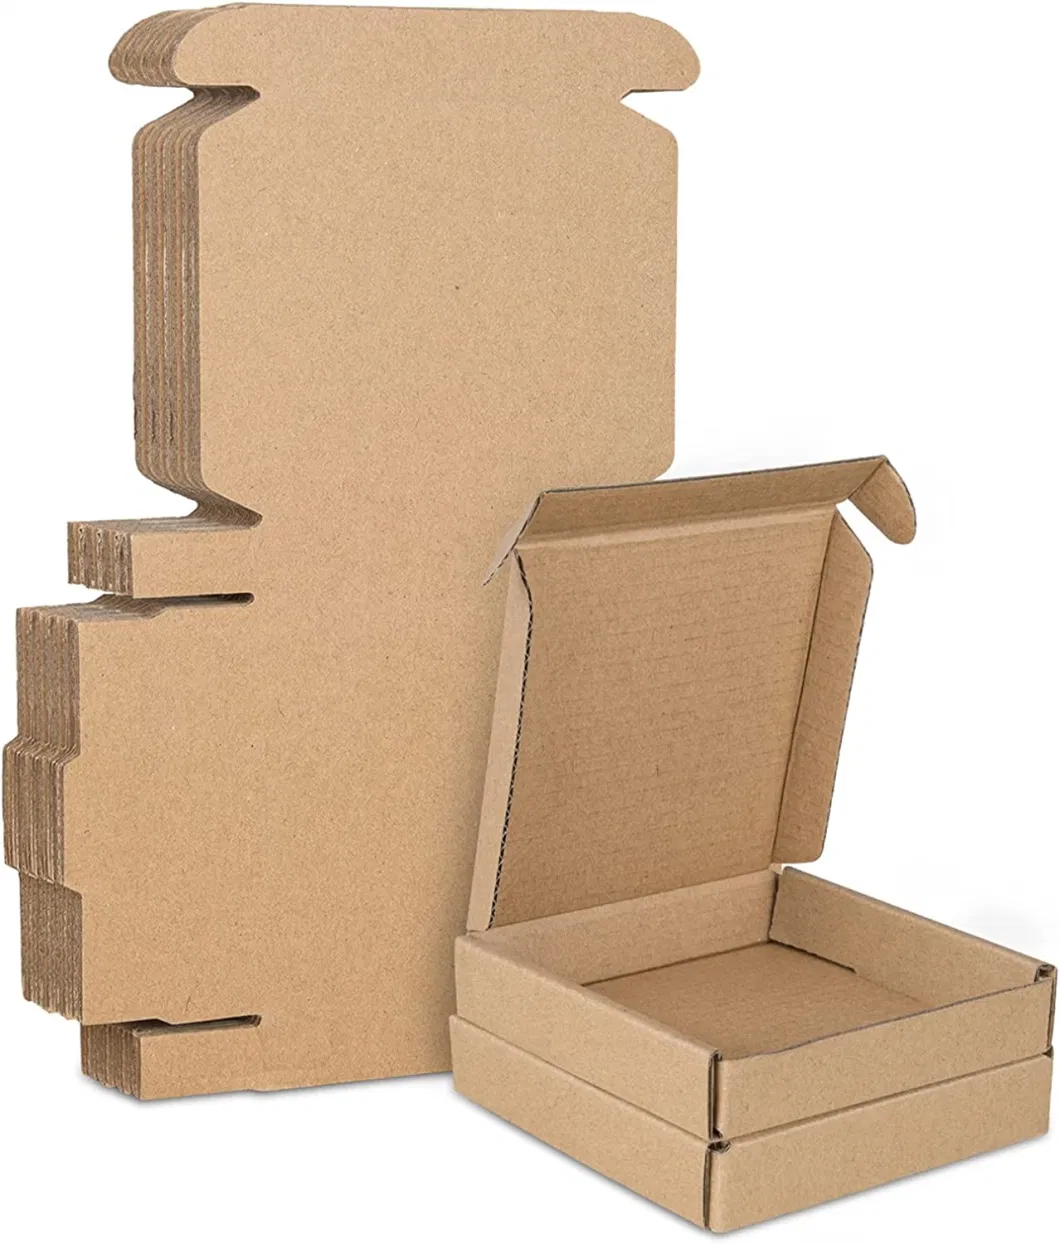 Custom Size Paper Package Box Eco-Friendly Airplane Box for Industrial